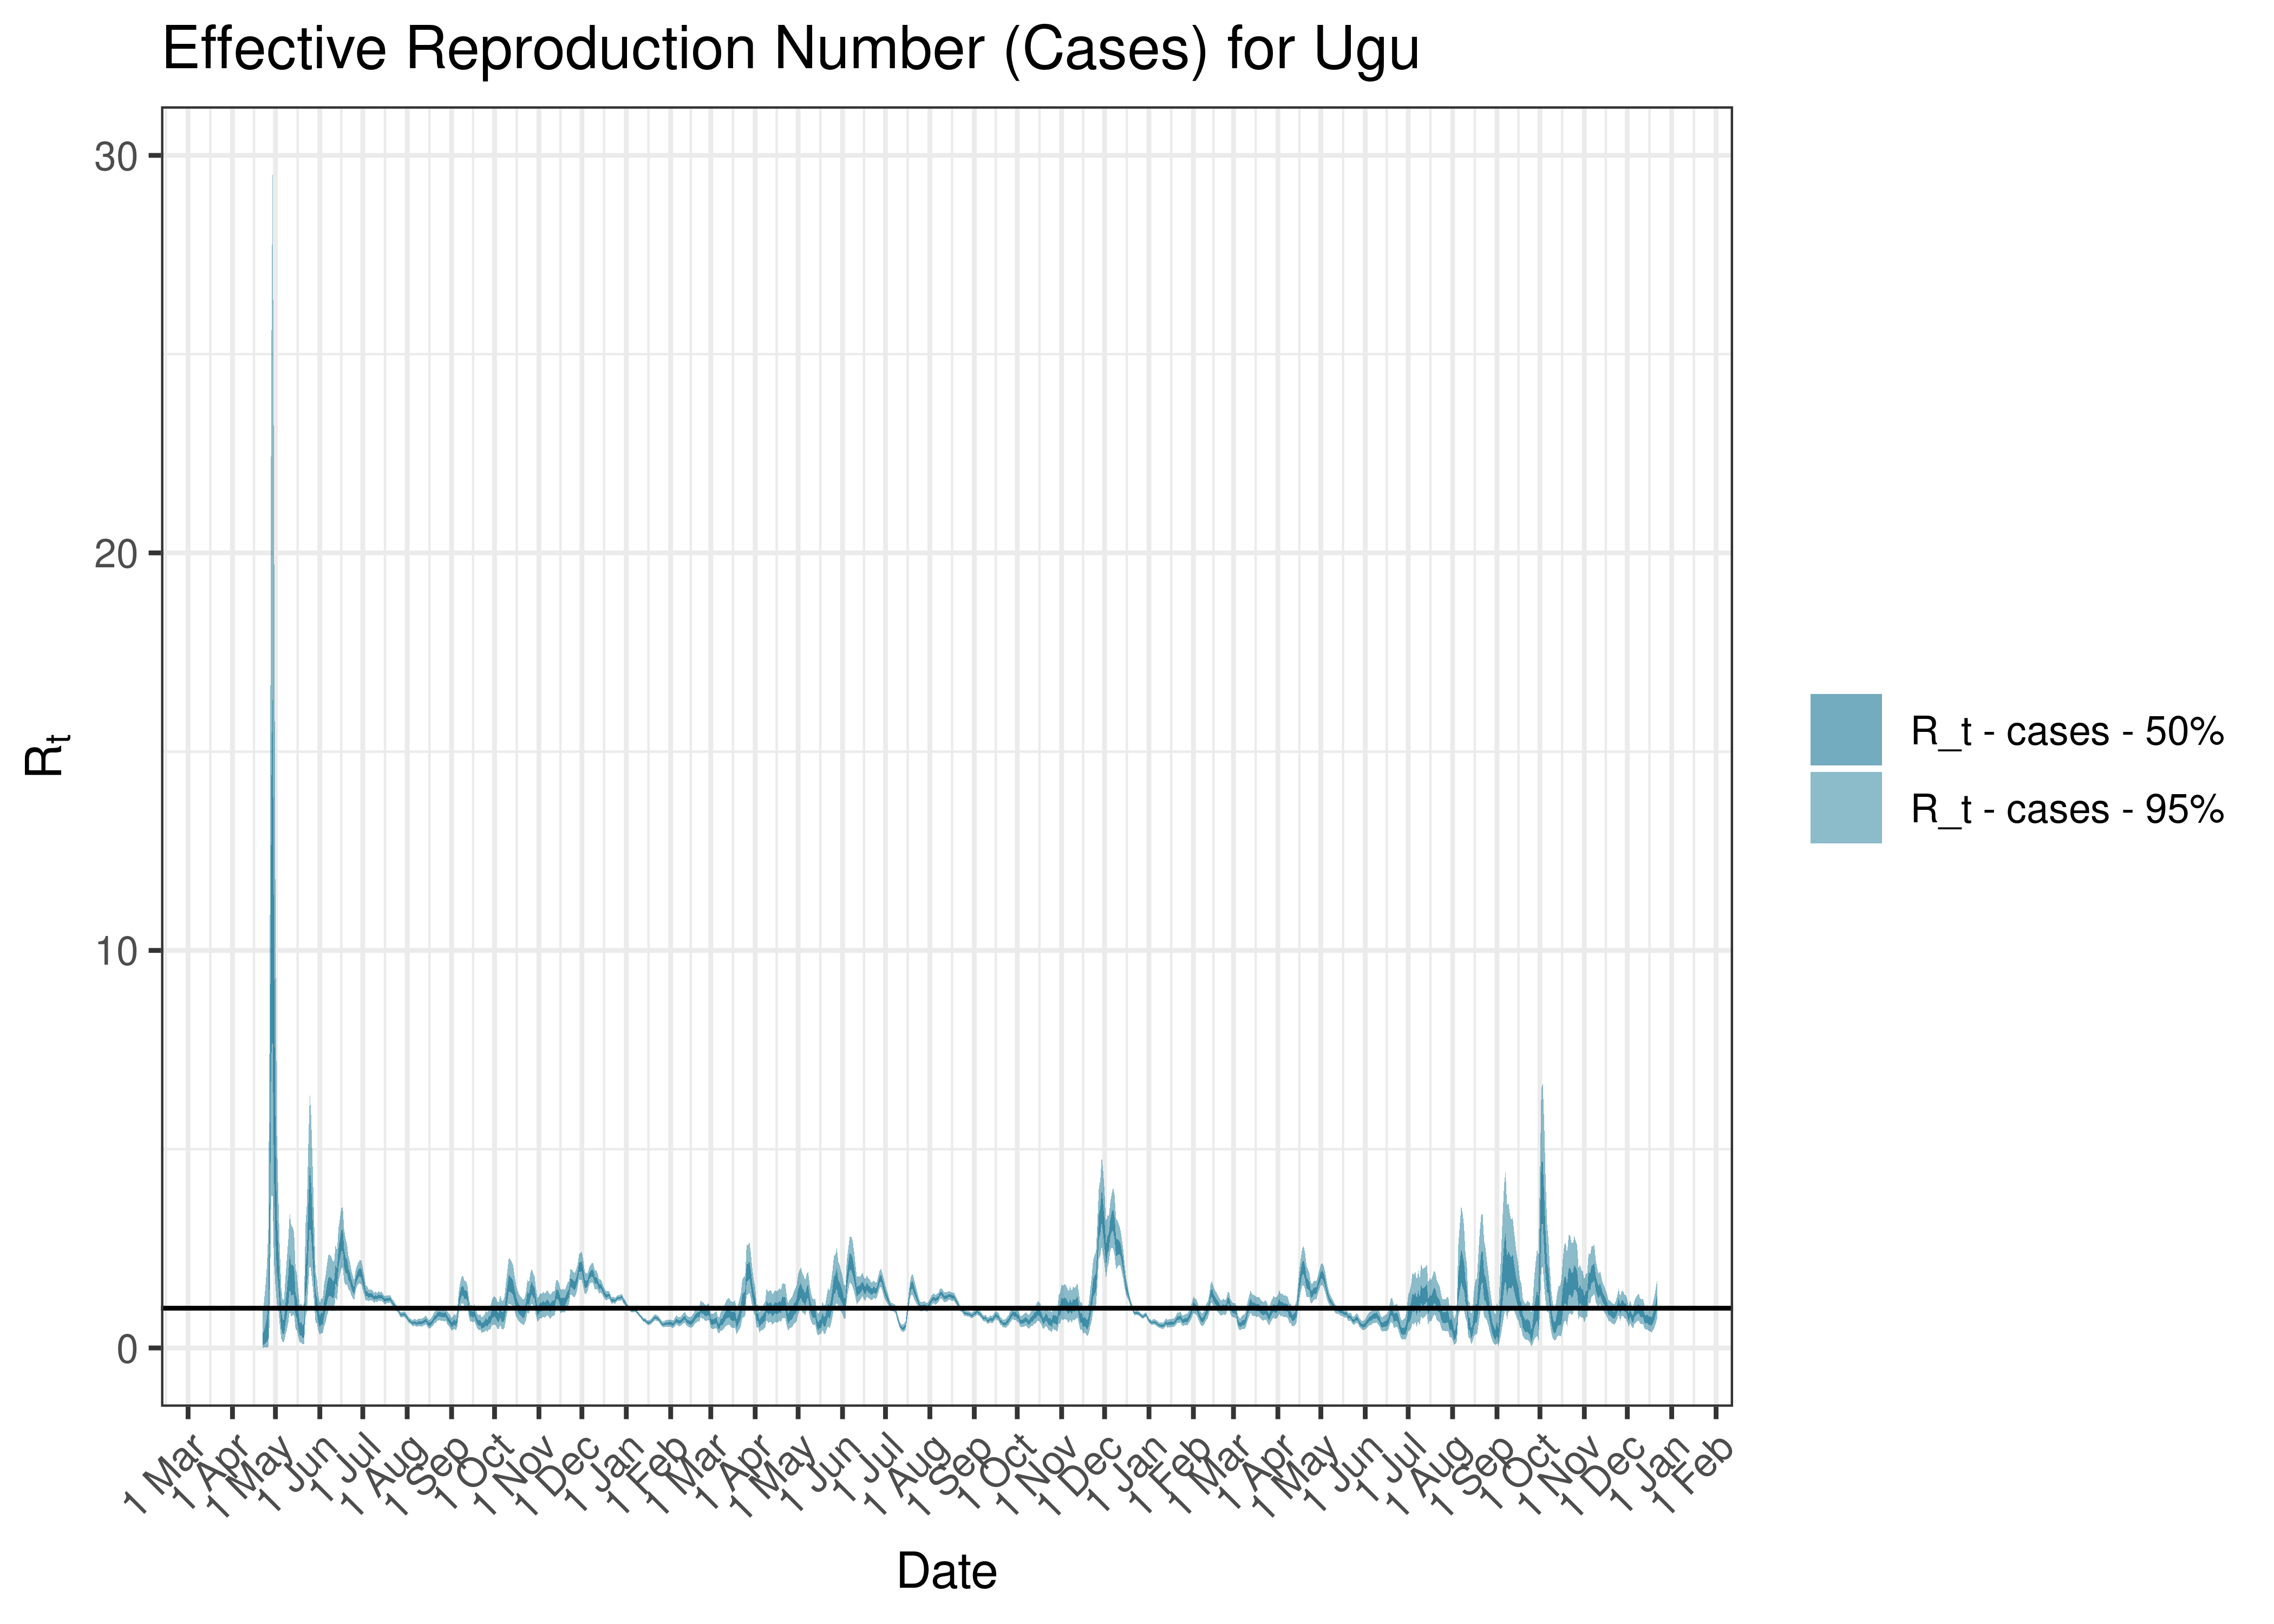 Estimated Effective Reproduction Number Based on Cases for Ugu since 1 April 2020